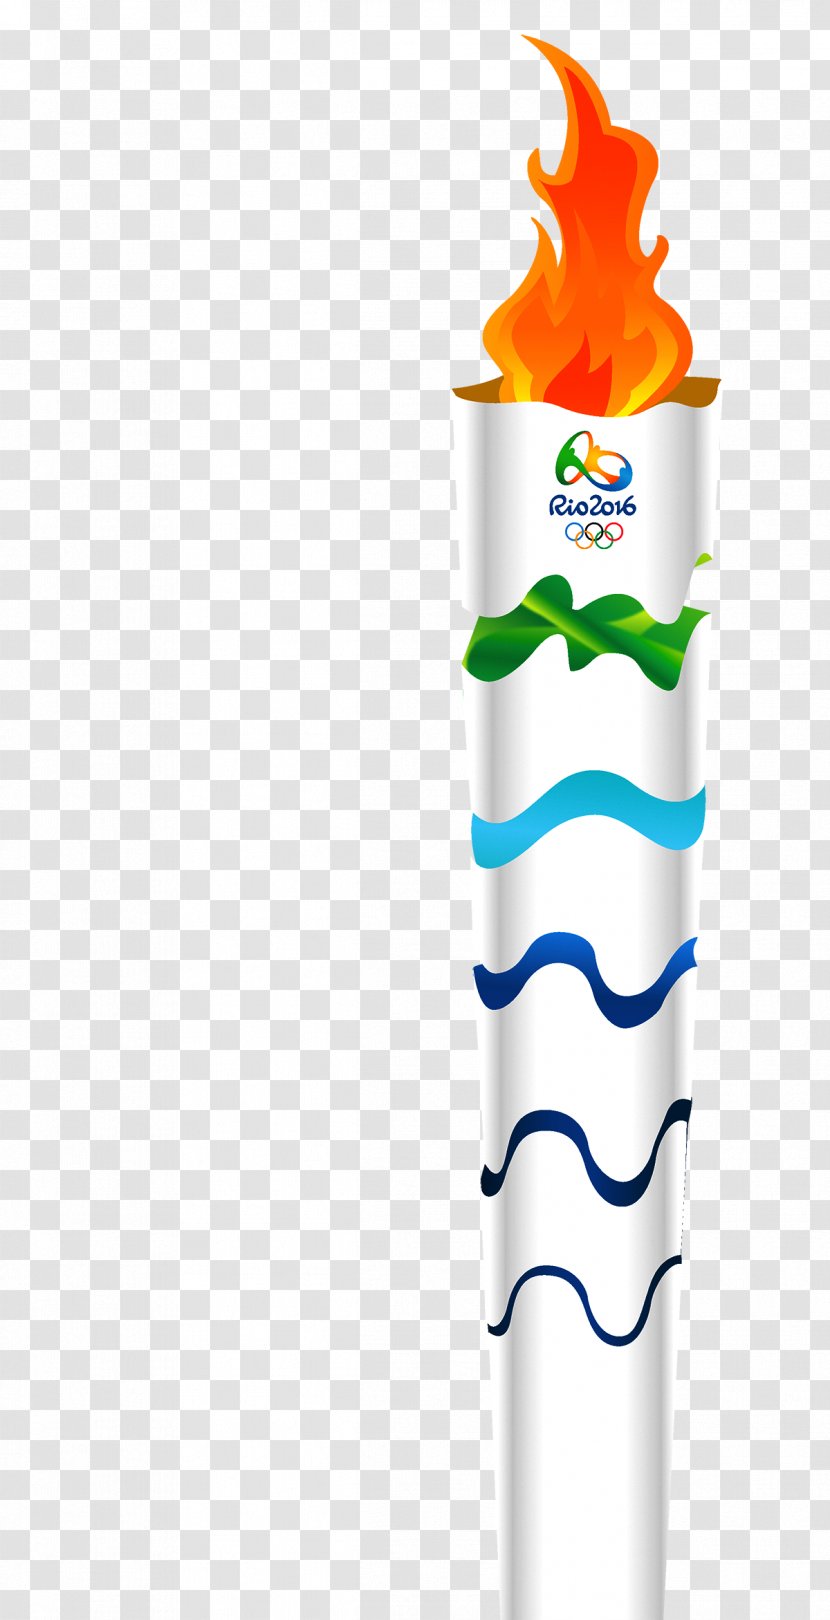 2016 Summer Olympics Torch Relay The London 2012 Rio De Janeiro Paralympics - Olympic Games Transparent PNG